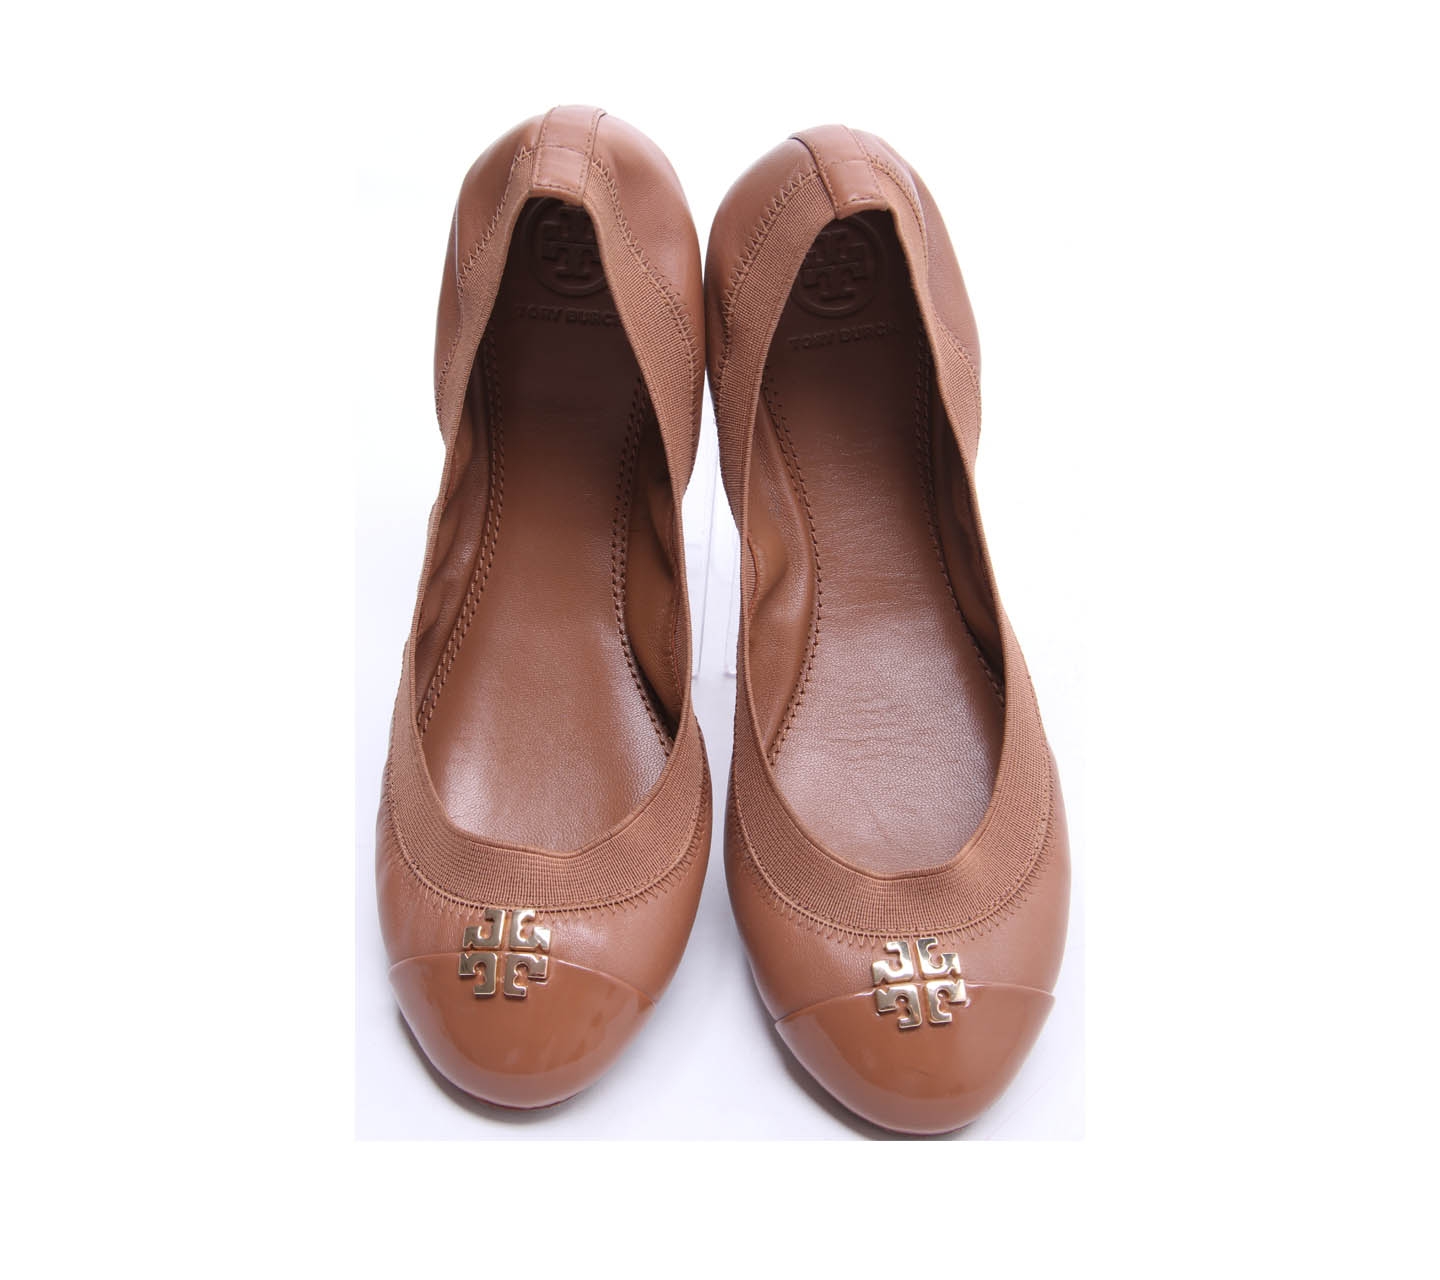 Tory Burch Brown Jolie Ballet Nappa Leather Flats